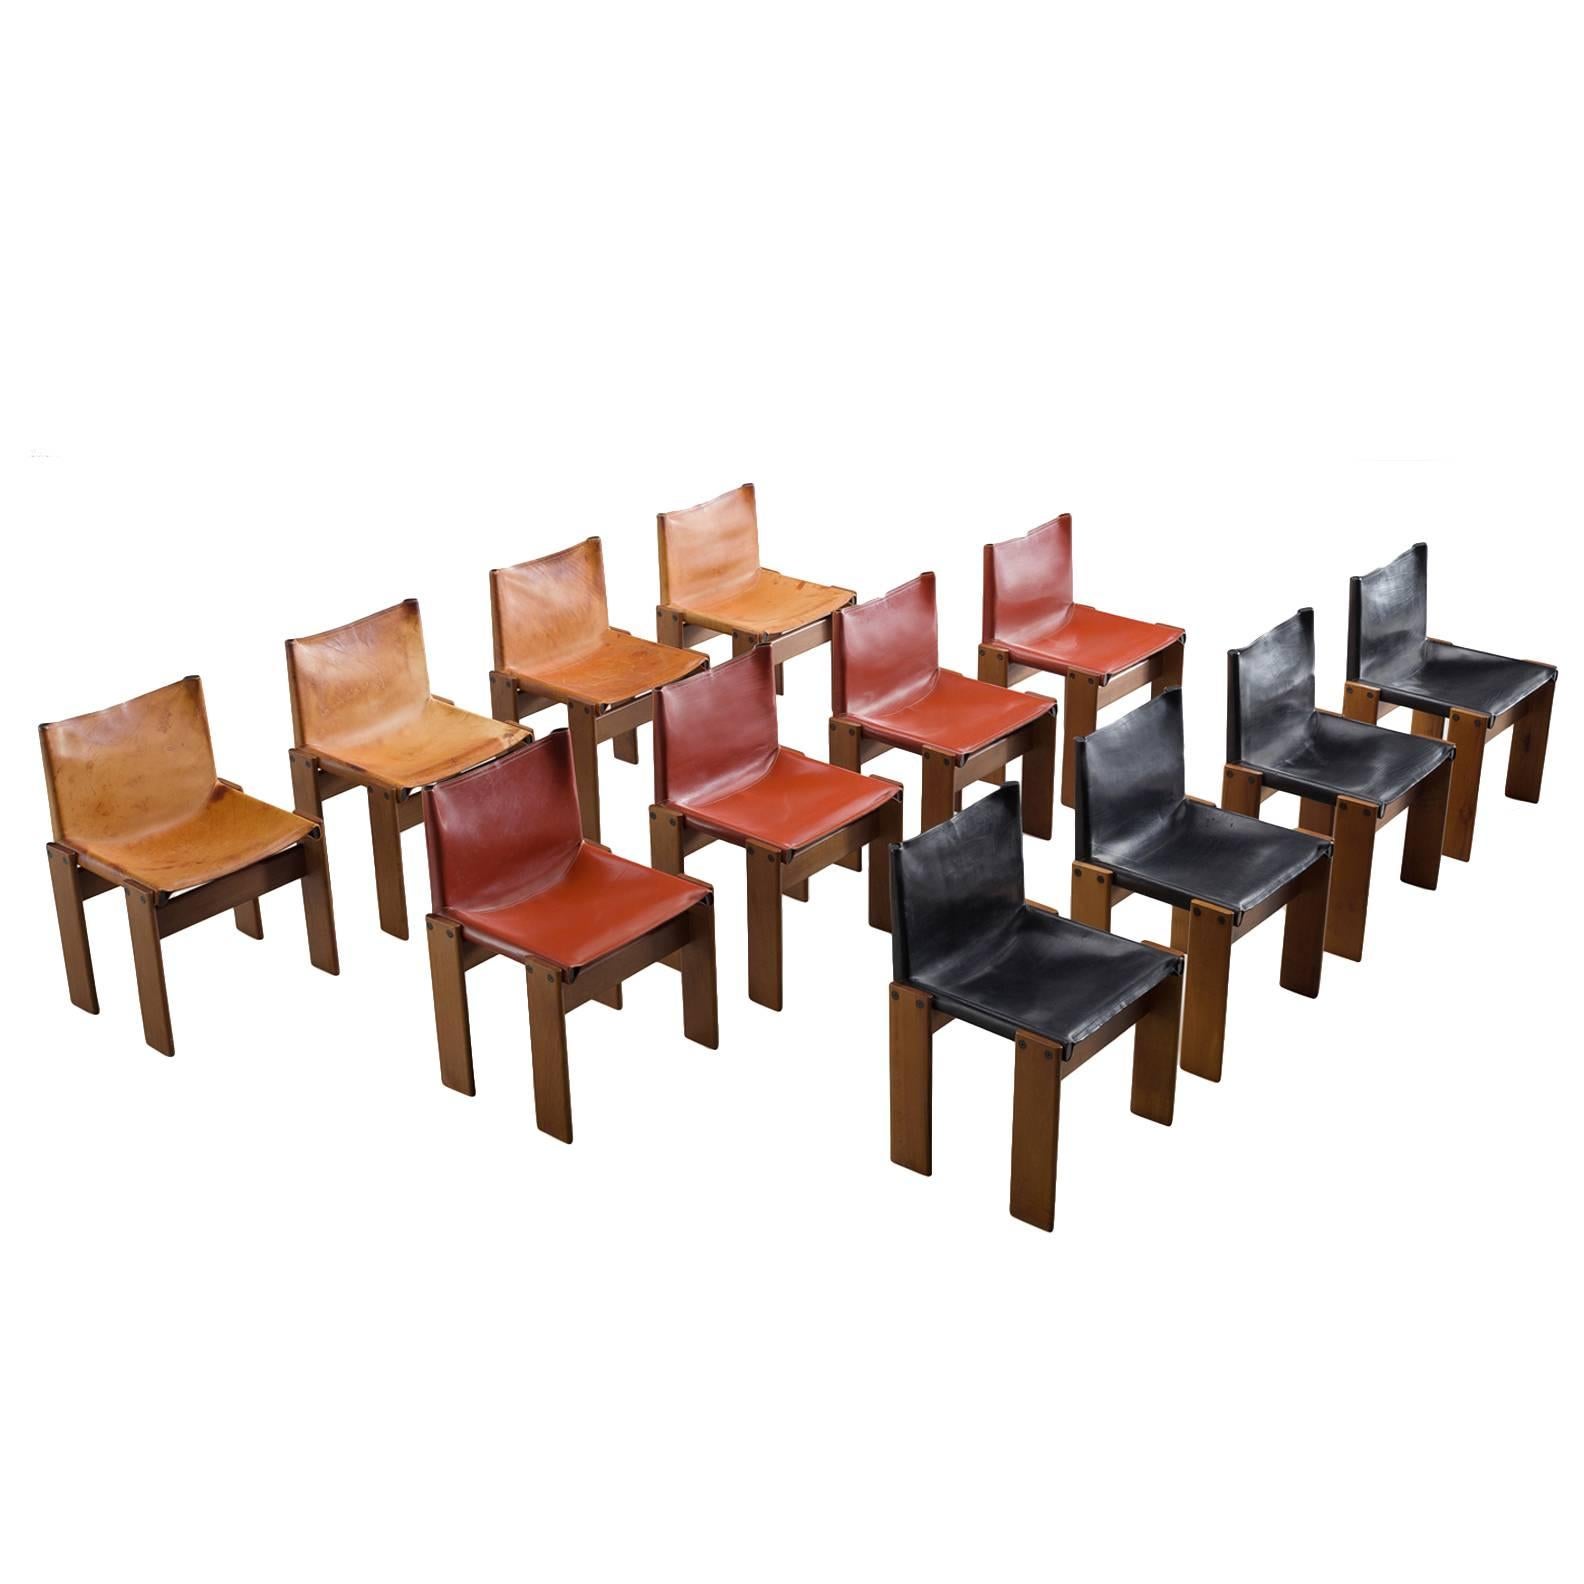 Three Sets of Scarpa Monk Chairs, Black, Sienna Red and Cognac